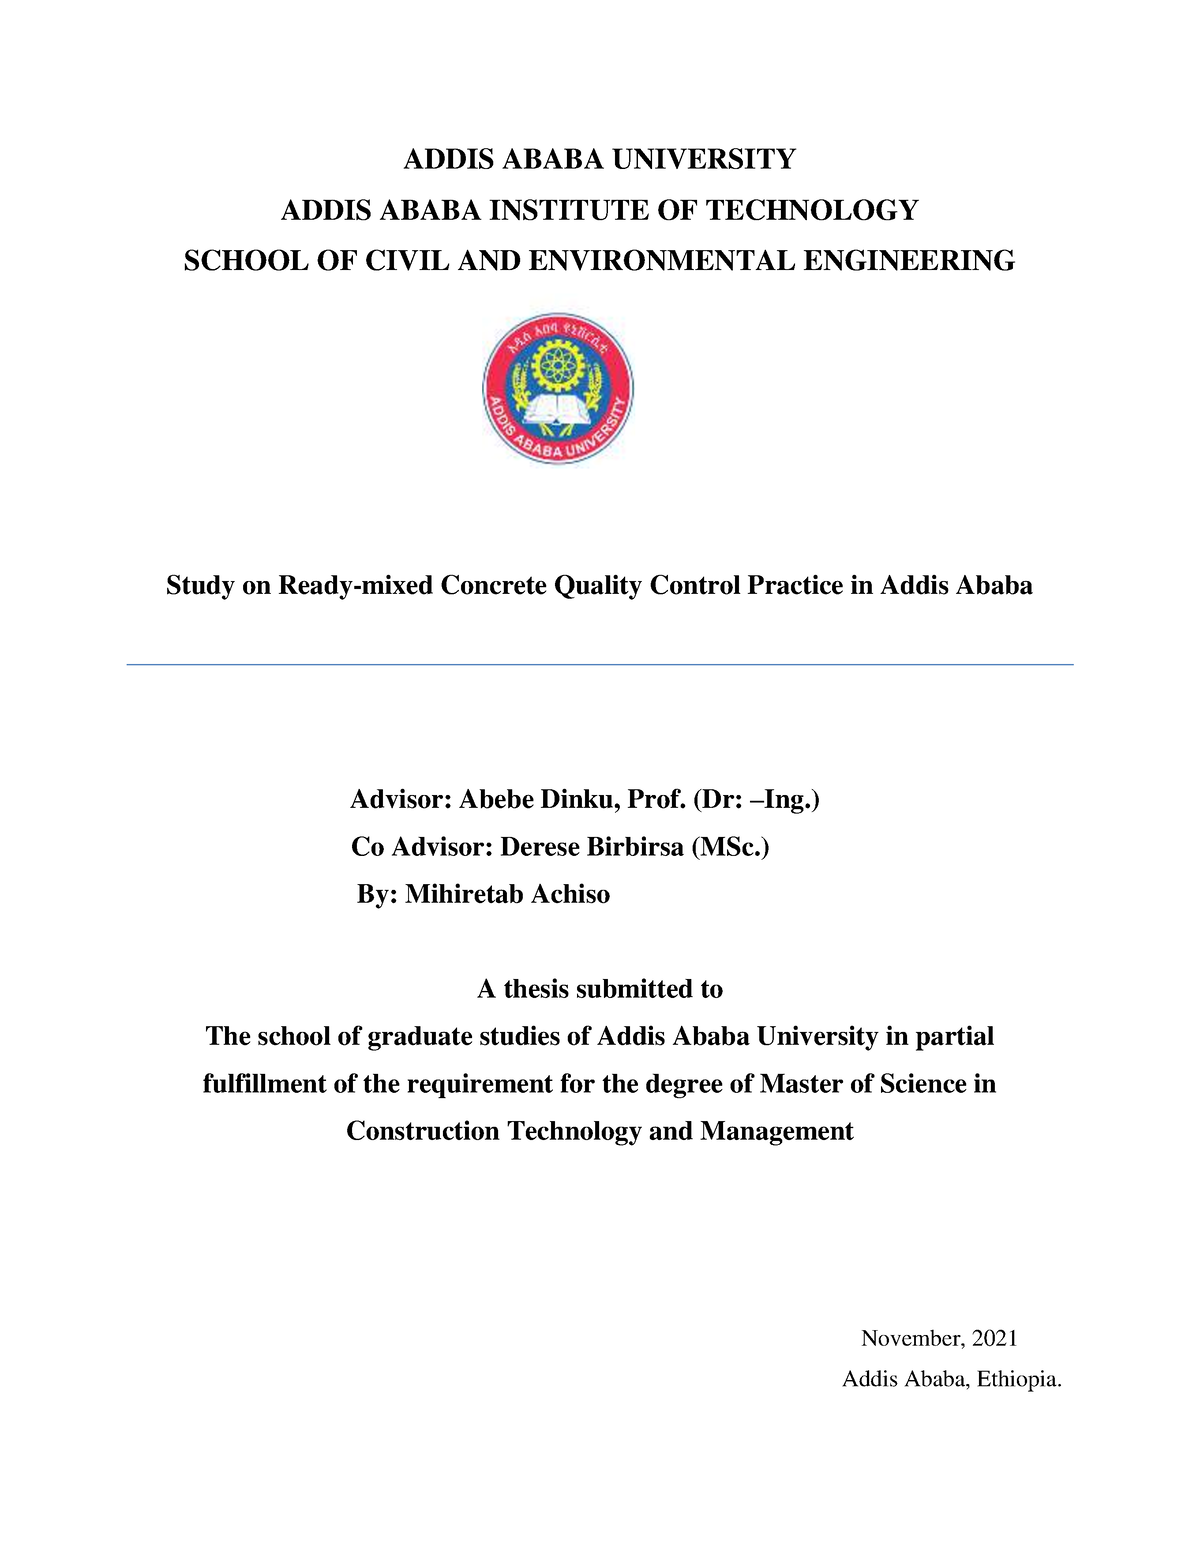 term paper in addis ababa university